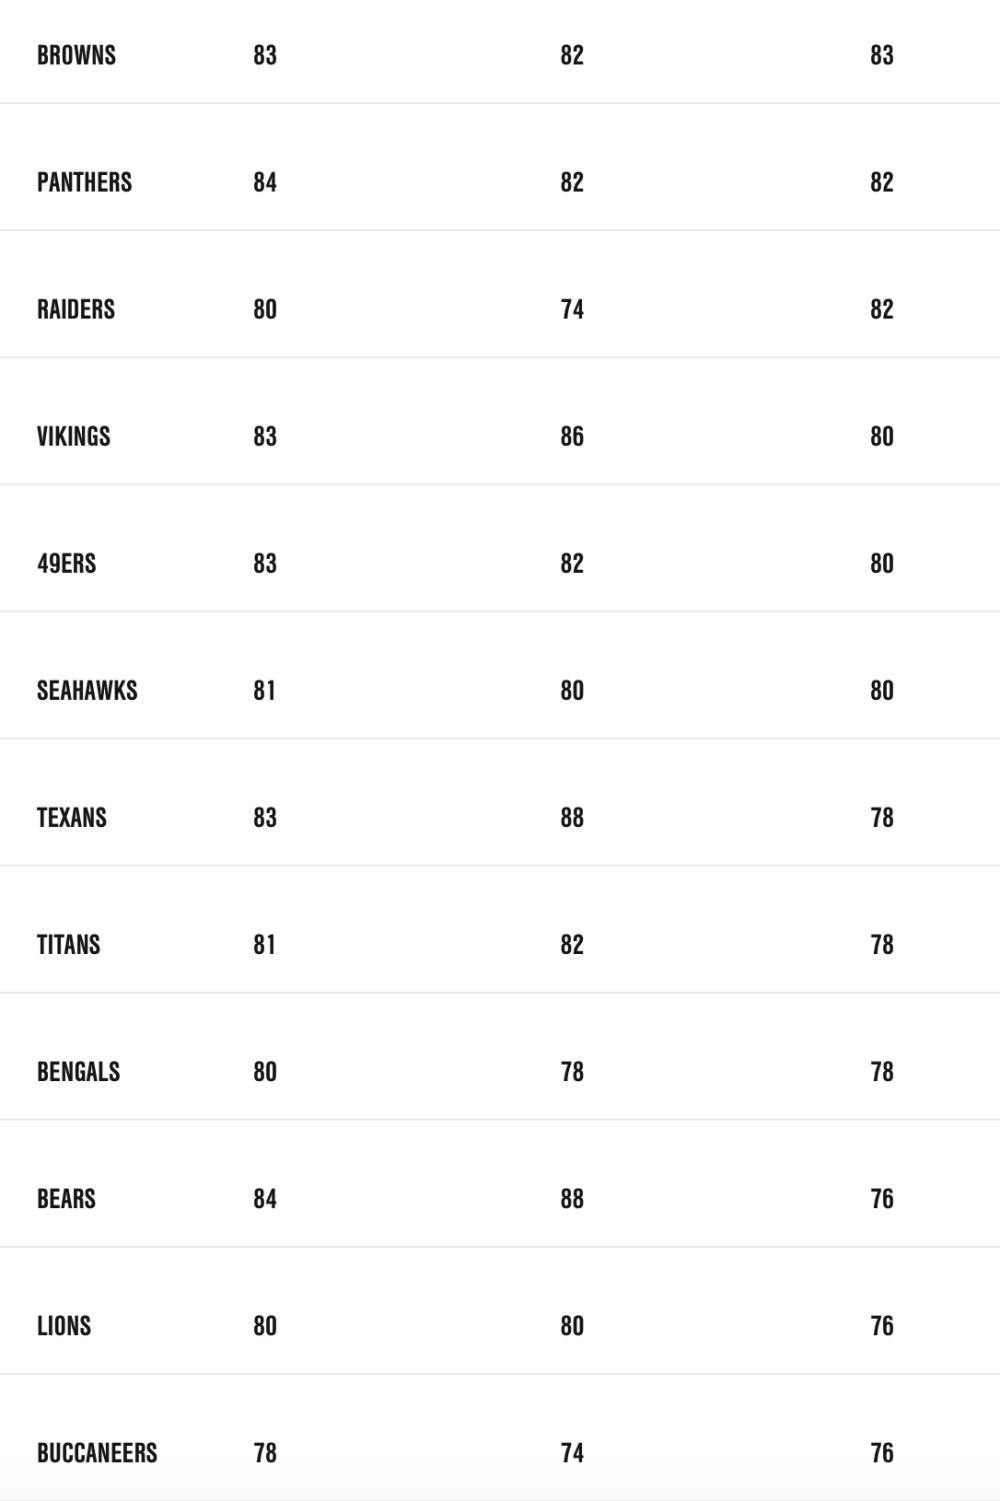 Madden NFL 20 Team Ratings Revealed (Overall, Defense, Offense